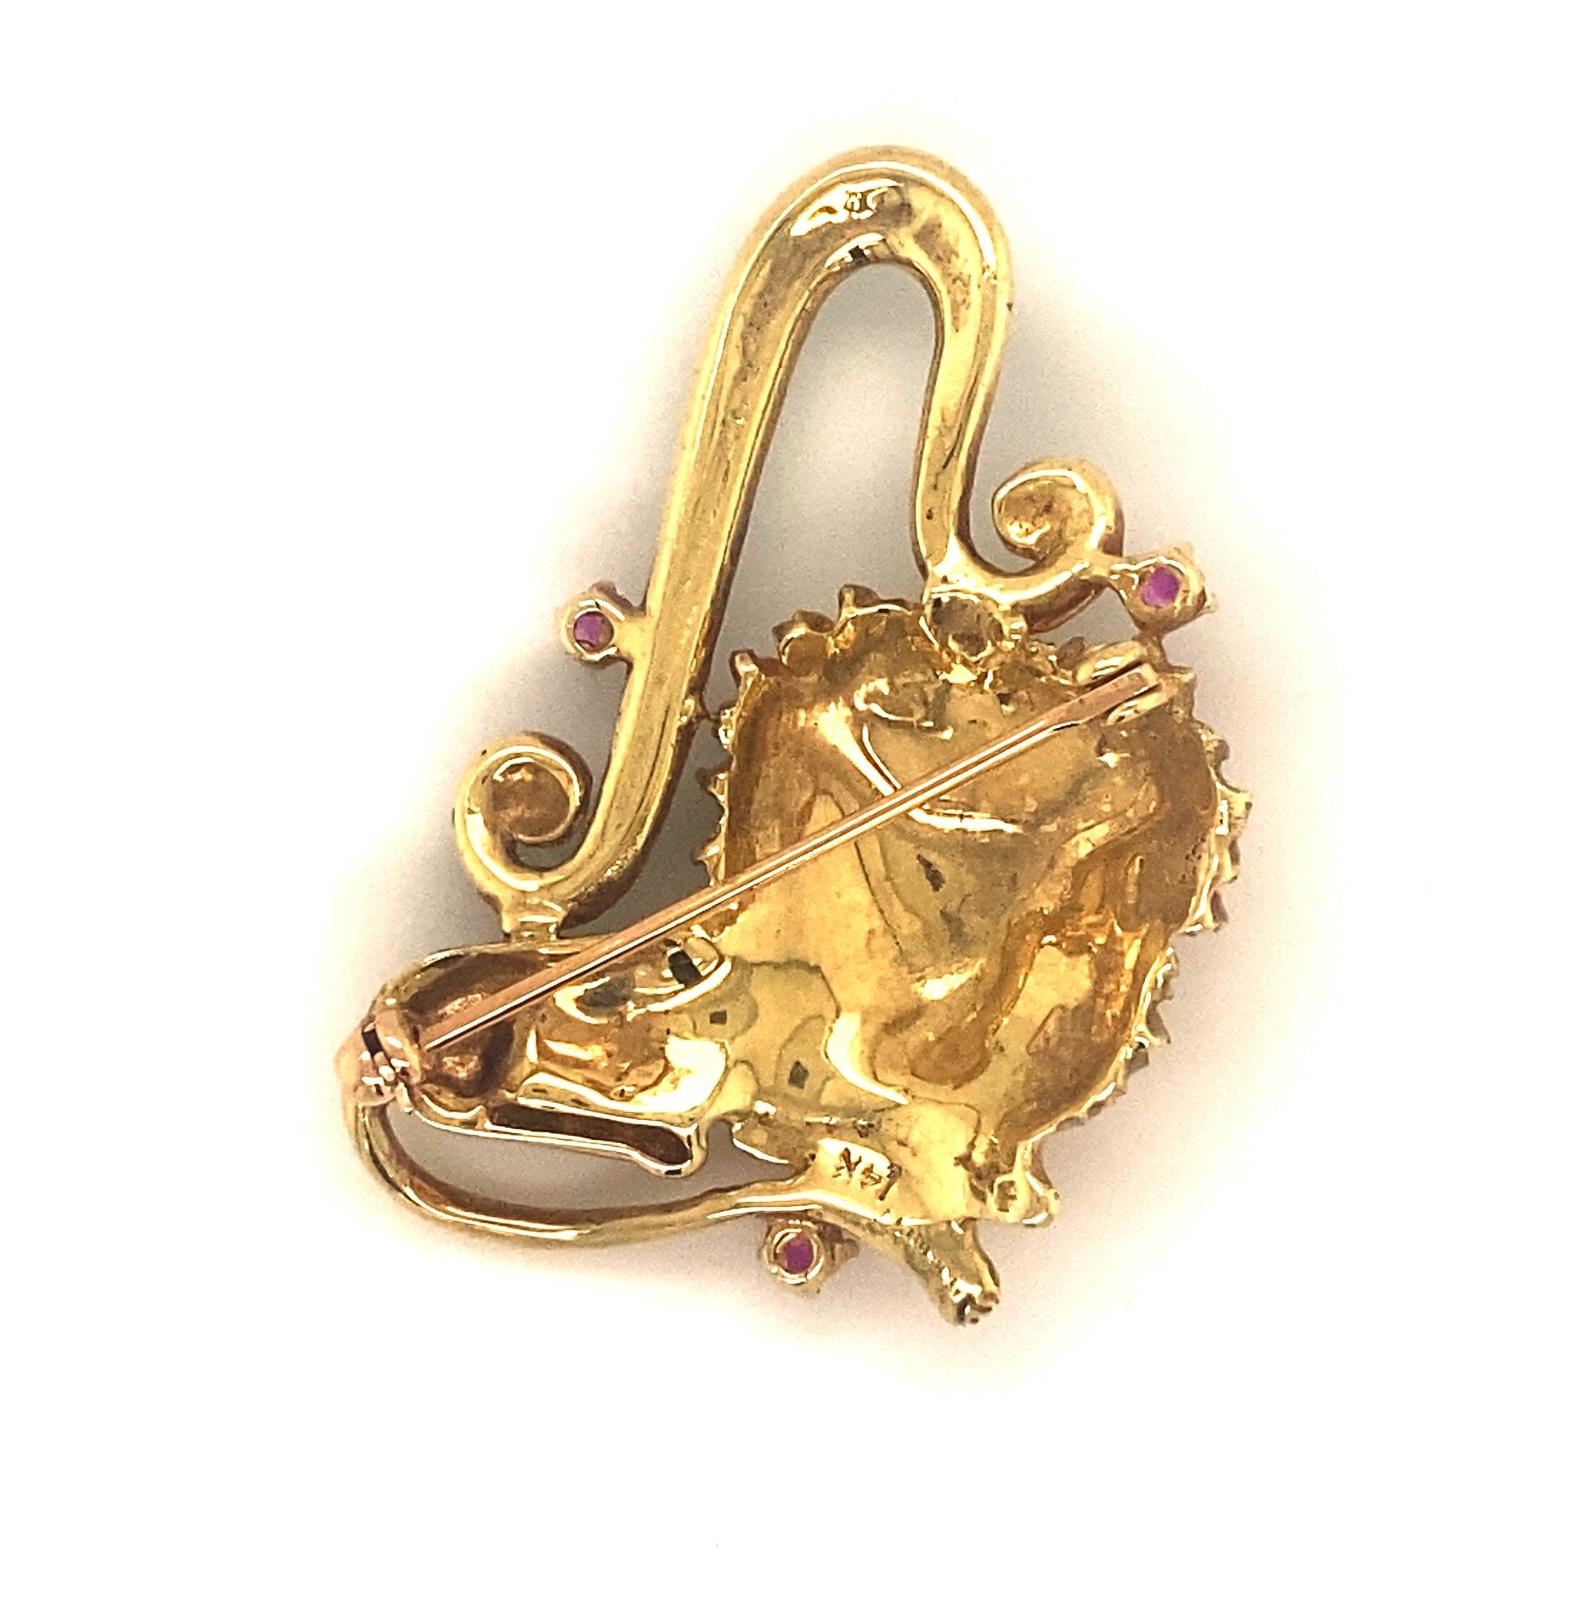 This is a beautiful brooch is designed with a lion and Leo sign with green enamel and rubies in 14k gold.  The brooch is marked with a maker’s mark Mart and 14k.  The three rubies are round natural and measure .24 carats. The lion has red enamel